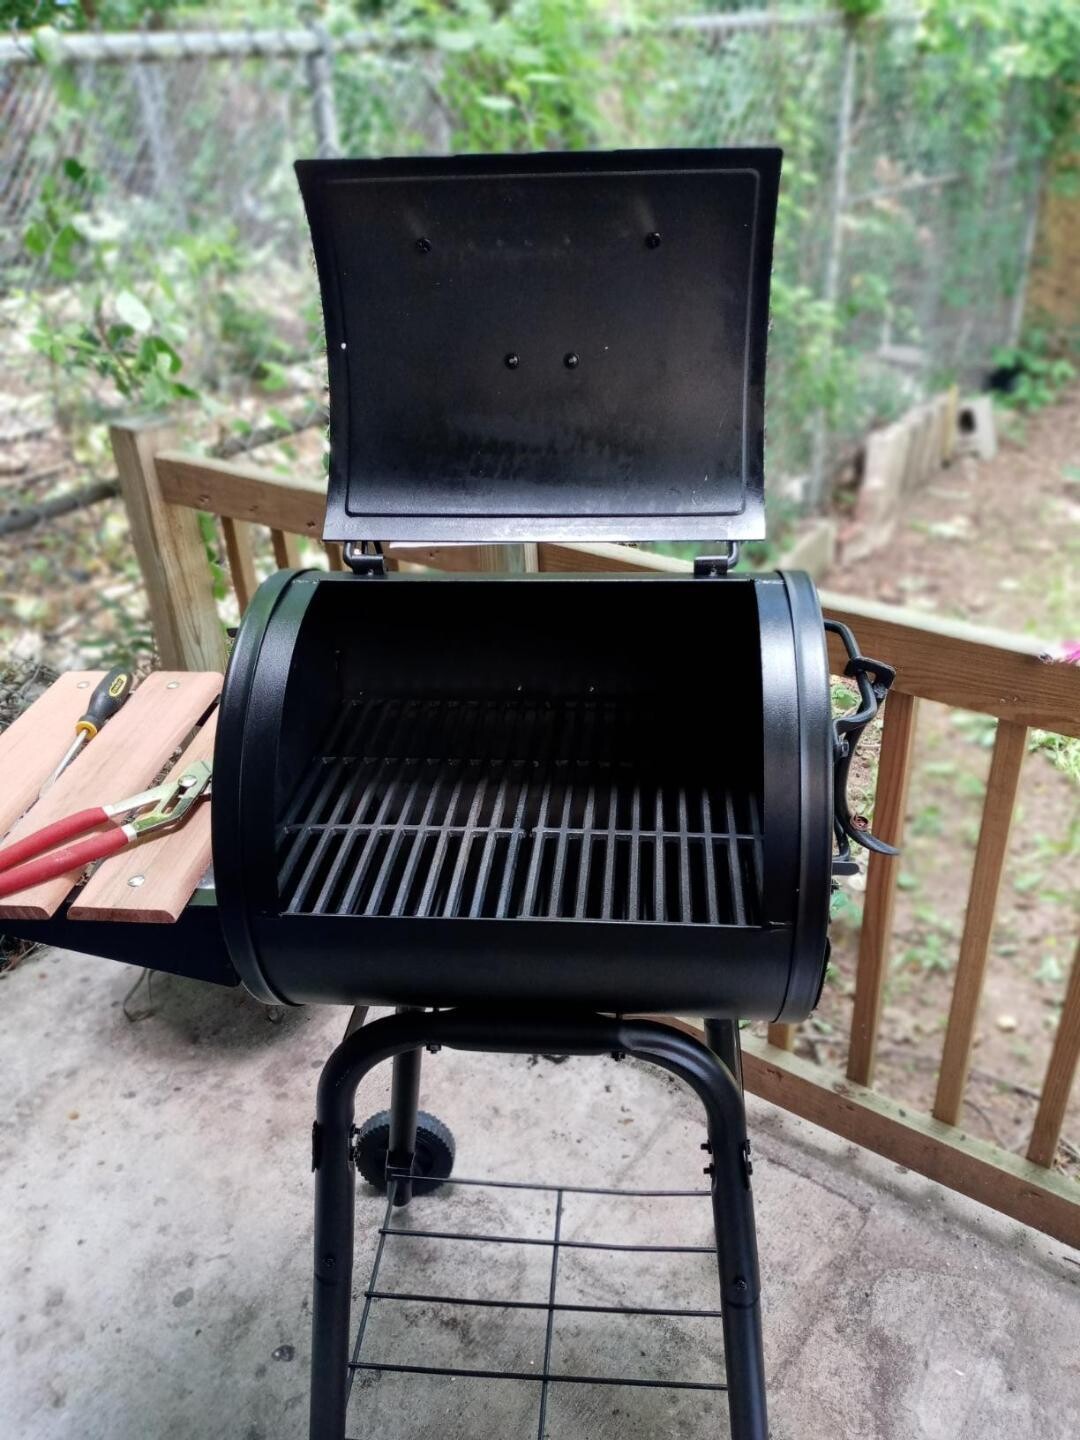 Grill Like a Pro with the Patio Pro Charcoal Grill - Perfect for Outdoor Cooking and Barbecues